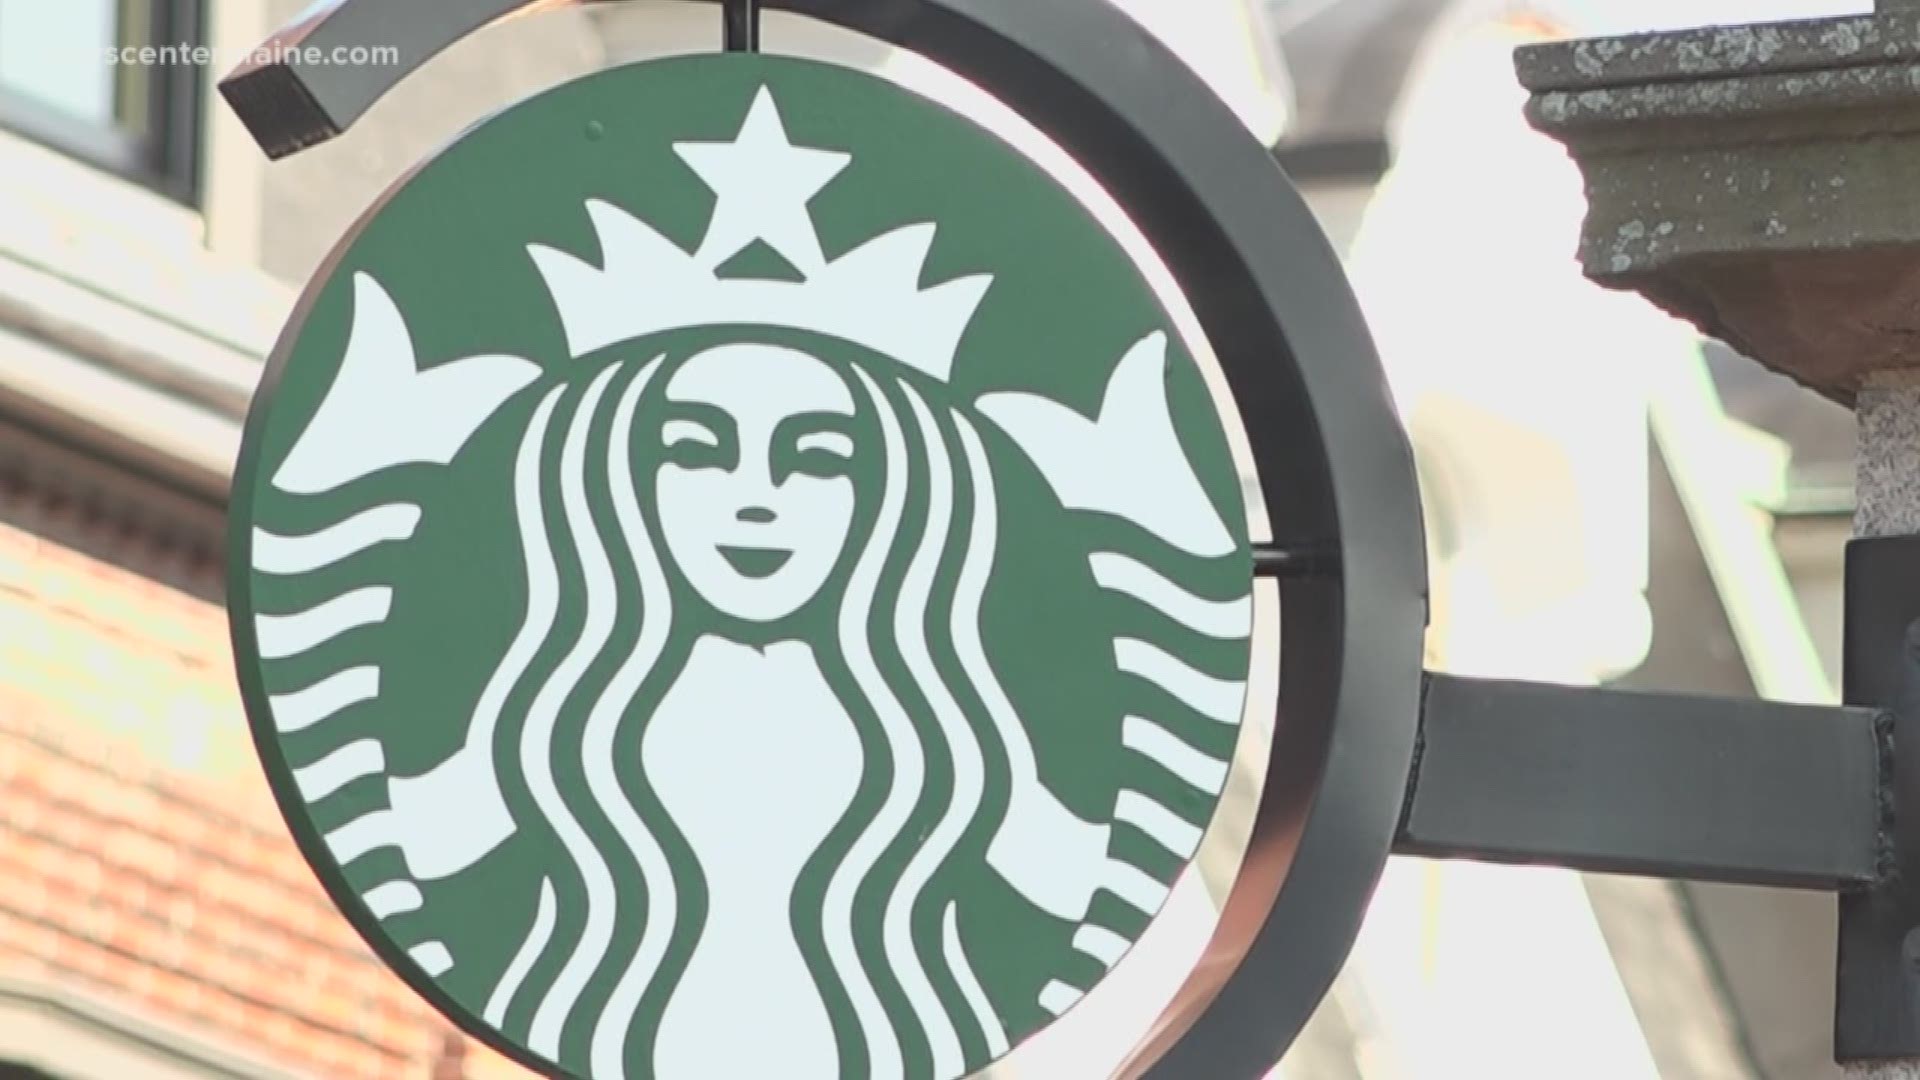 Report of discrimination at a Maine Starbucks